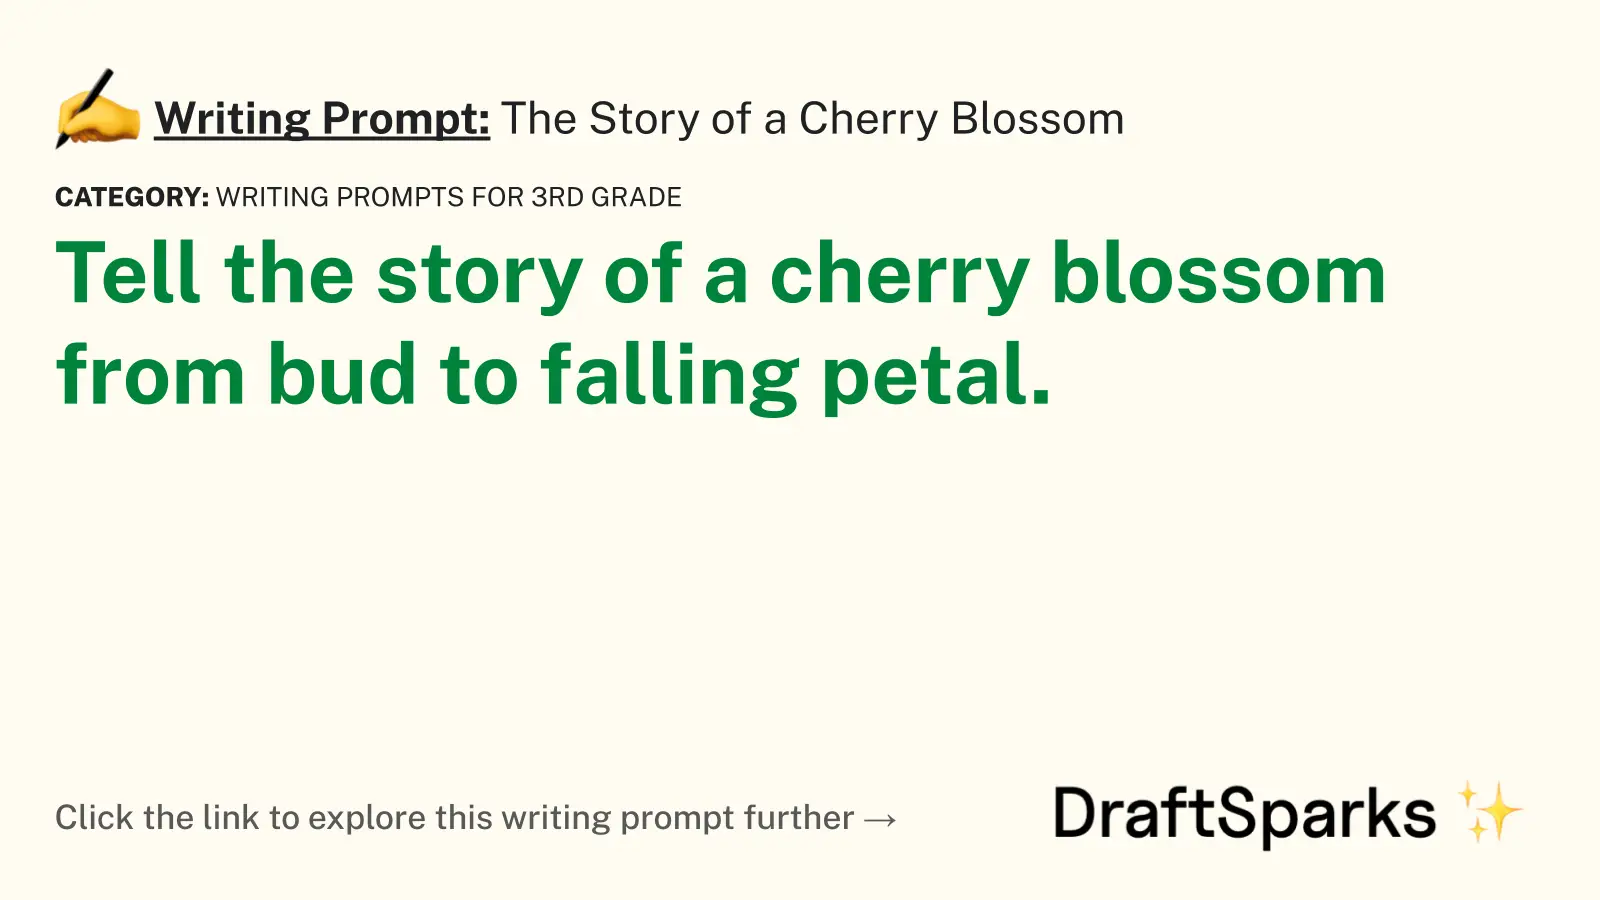 The Story of a Cherry Blossom